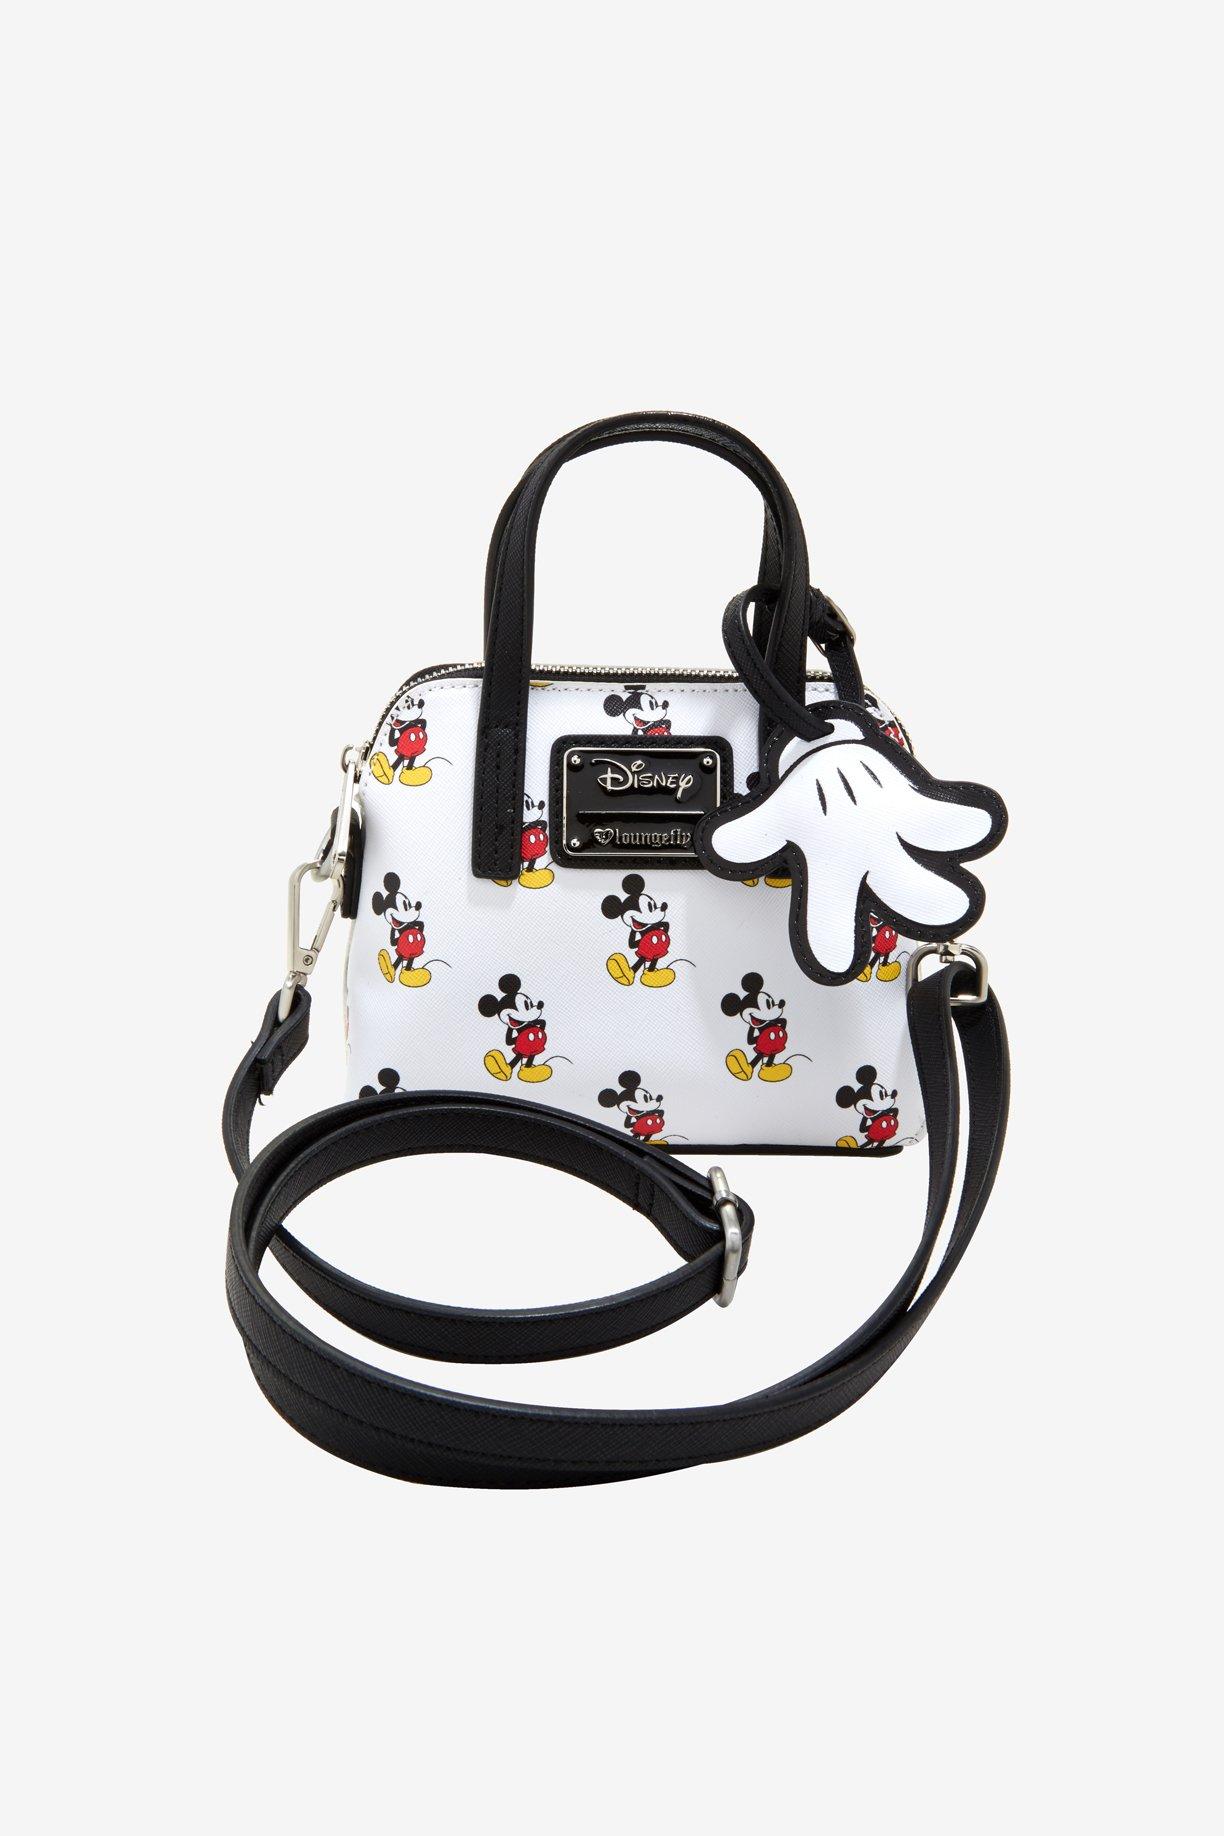 Disney Mickey Mouse Oh Boy! Handbag With Removable Strap - The